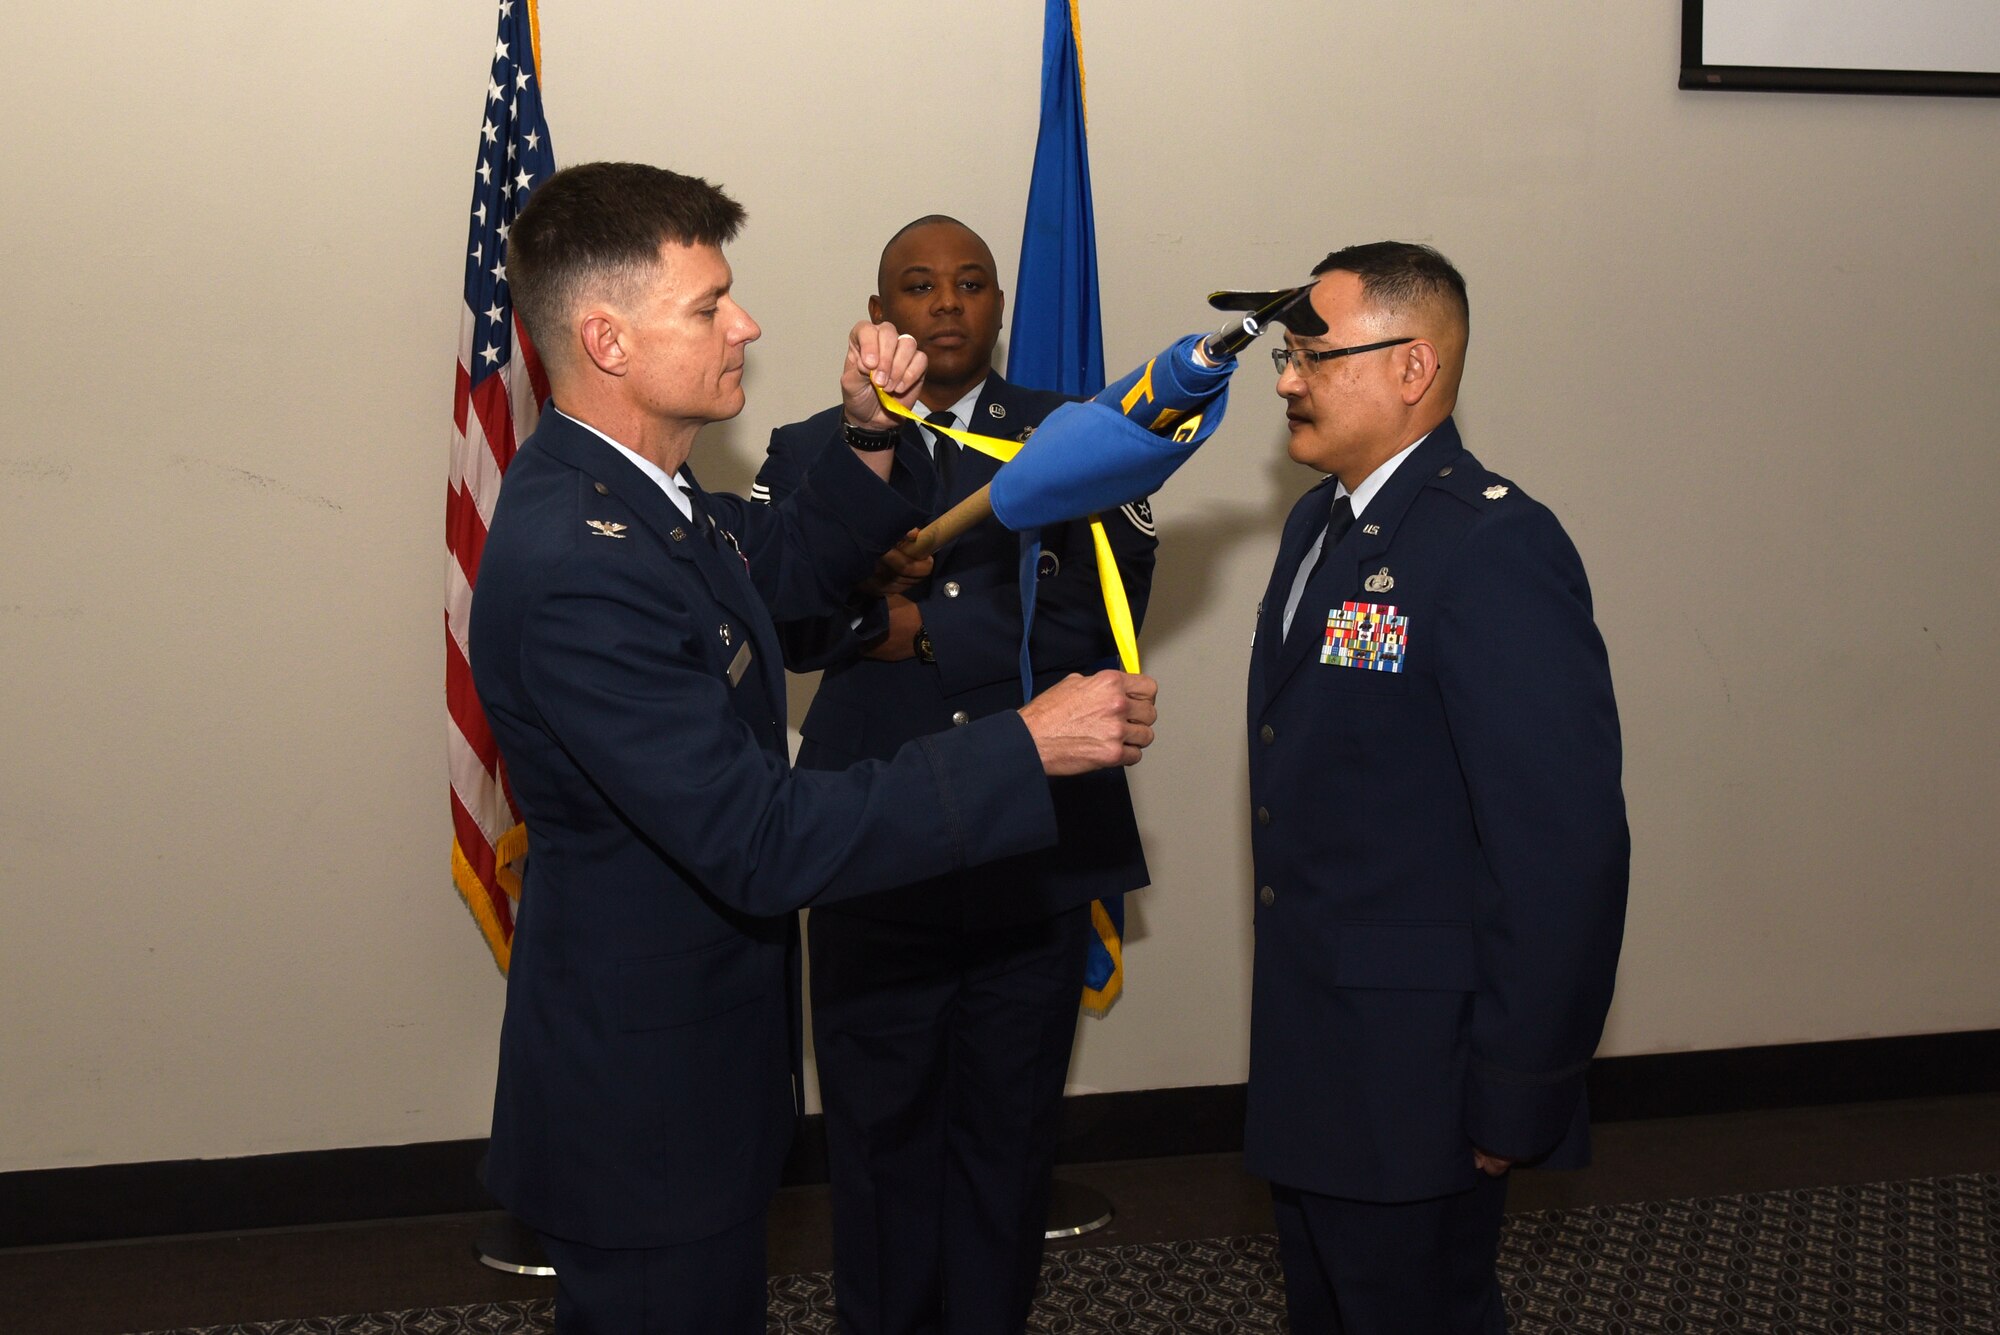 U.S. Air Force Col. Thomas Coakley, 17th Training Group commander, unfurls the 313th Training Squadron guideon during the 313th TRS Assumption of Command at the Event Center on Goodfellow Air Force Base, Texas, Oct. 24, 2018. The guideon was bound because the 313th TRS was inactive before the assumption of command ceremony. (U.S. Air Force photo by Staff Sgt. Joshua Edwards/Released)